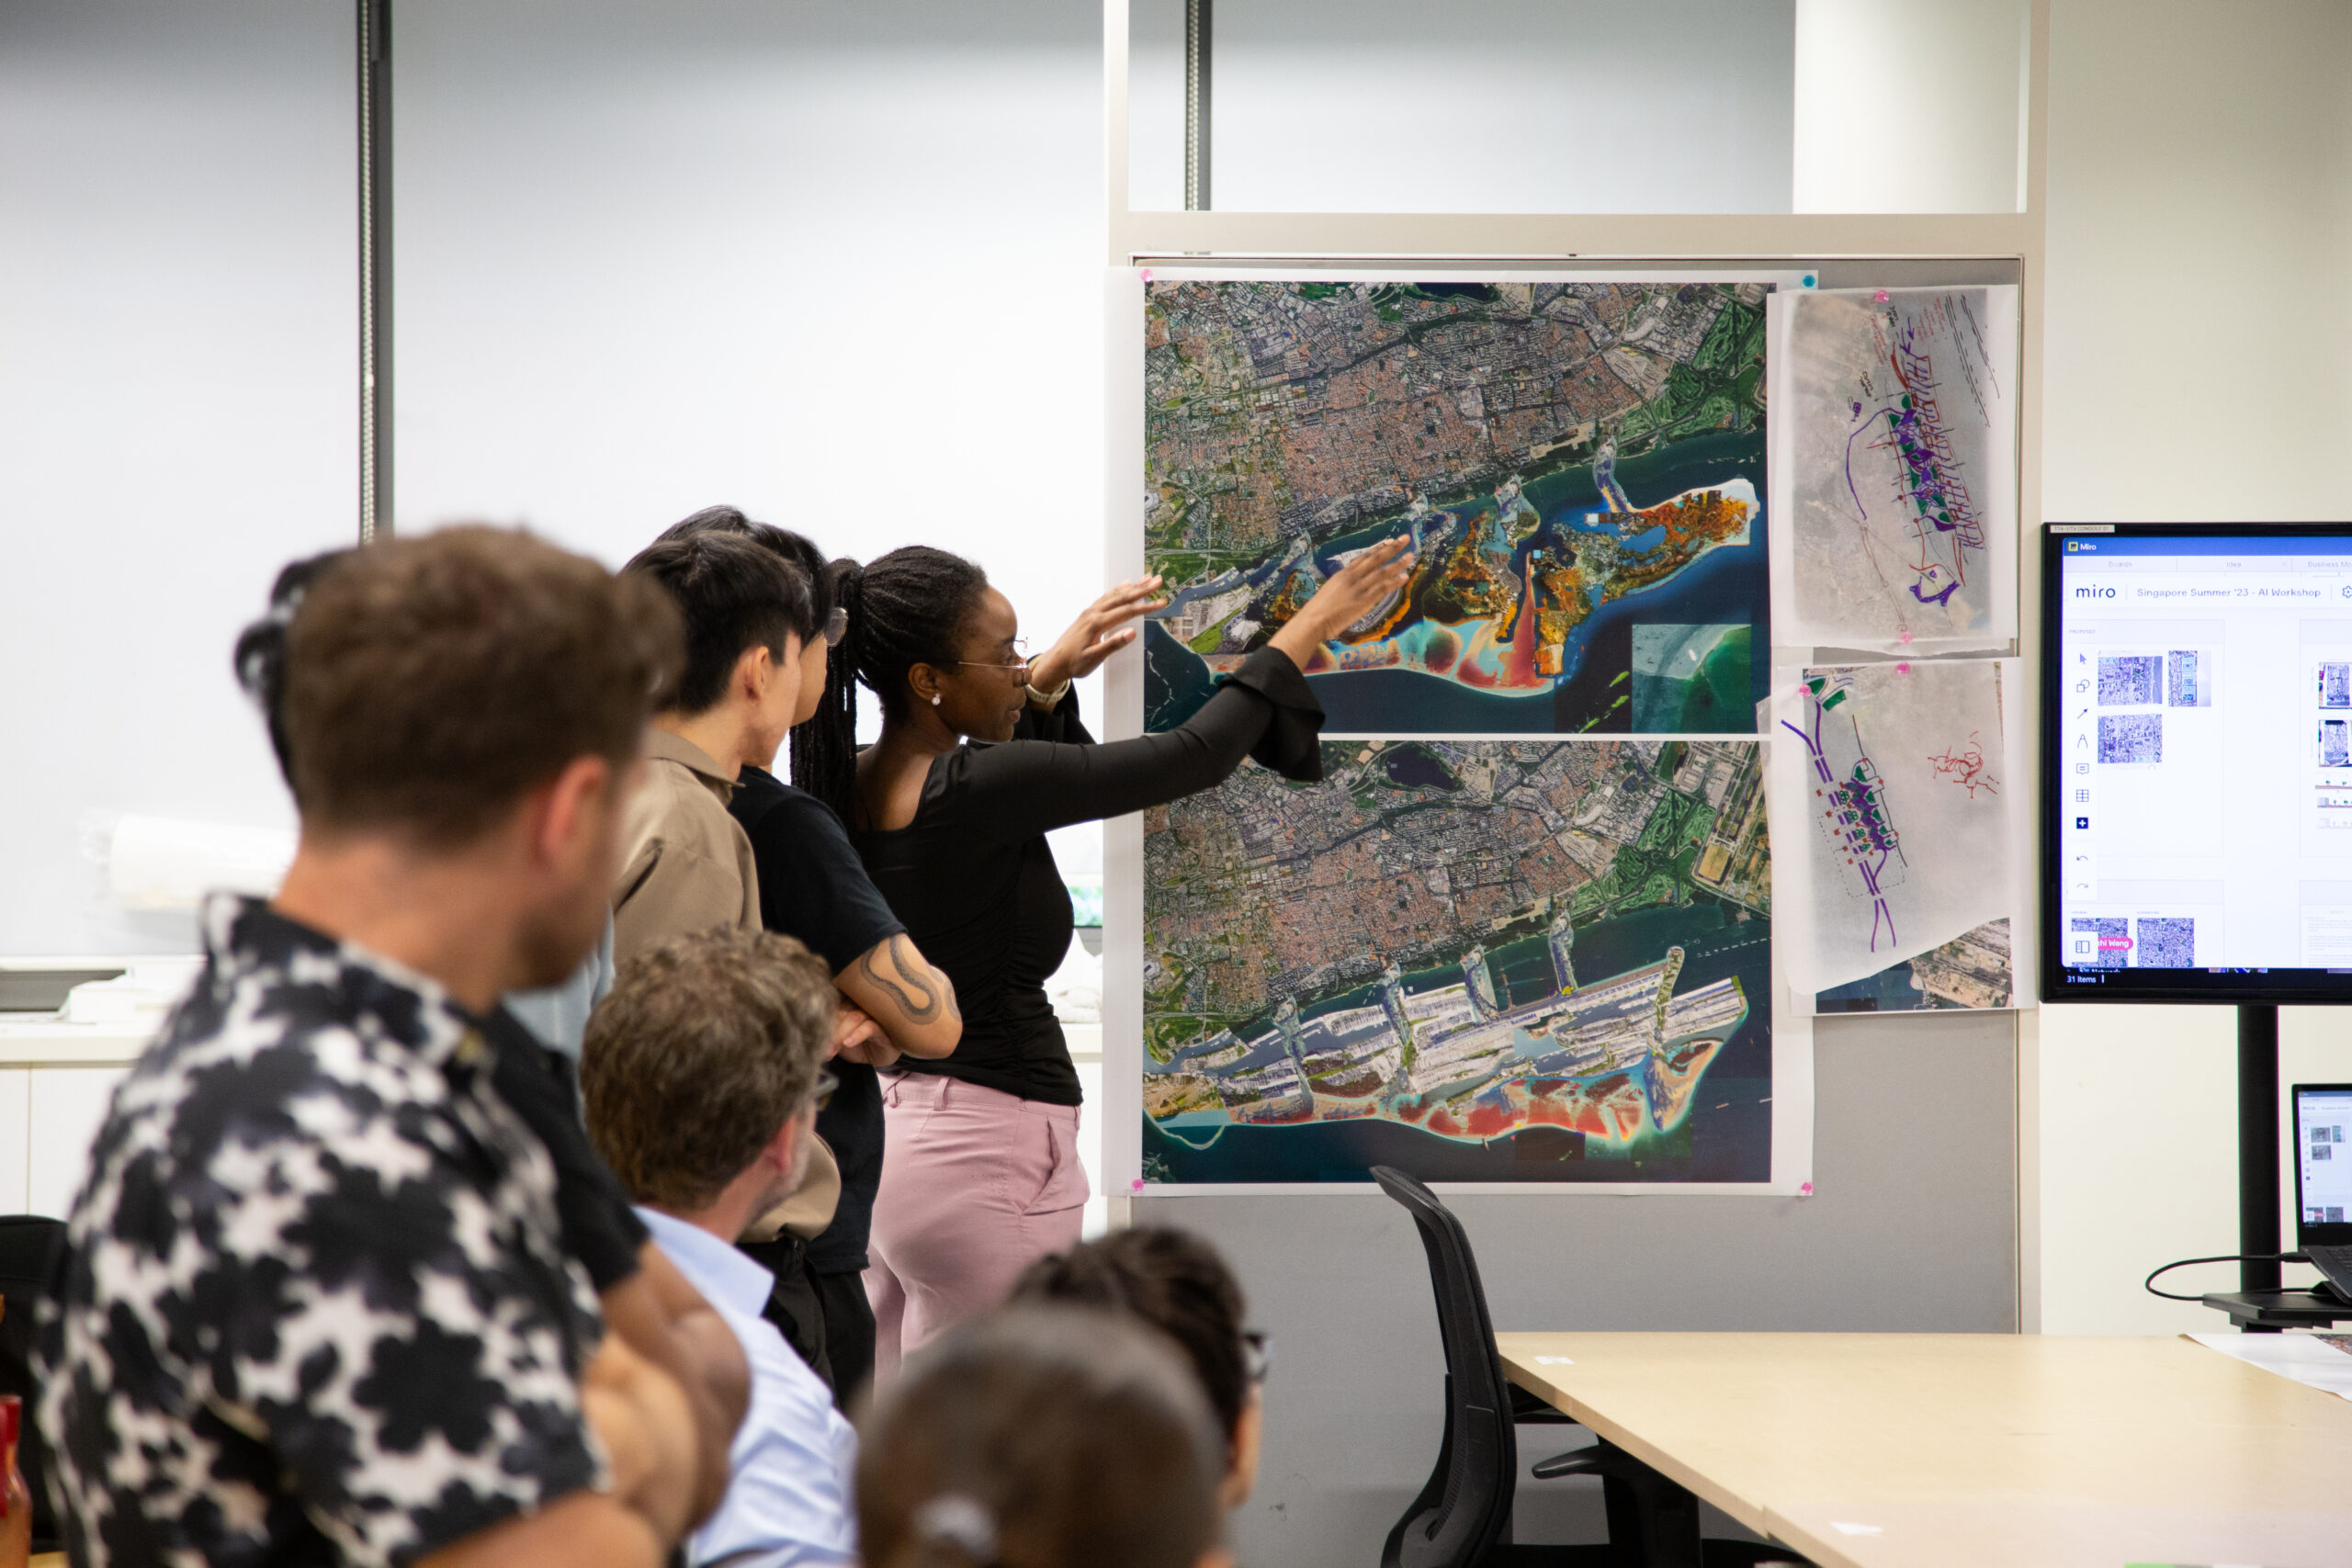 Singapore University of Technology and Design (SUTD) students present a “micro archipelago” coastal defense and resource enrichment strategy during “Condensations 02: Coastal Resilience” with Pratt students, faculty and other local stakeholders observing.